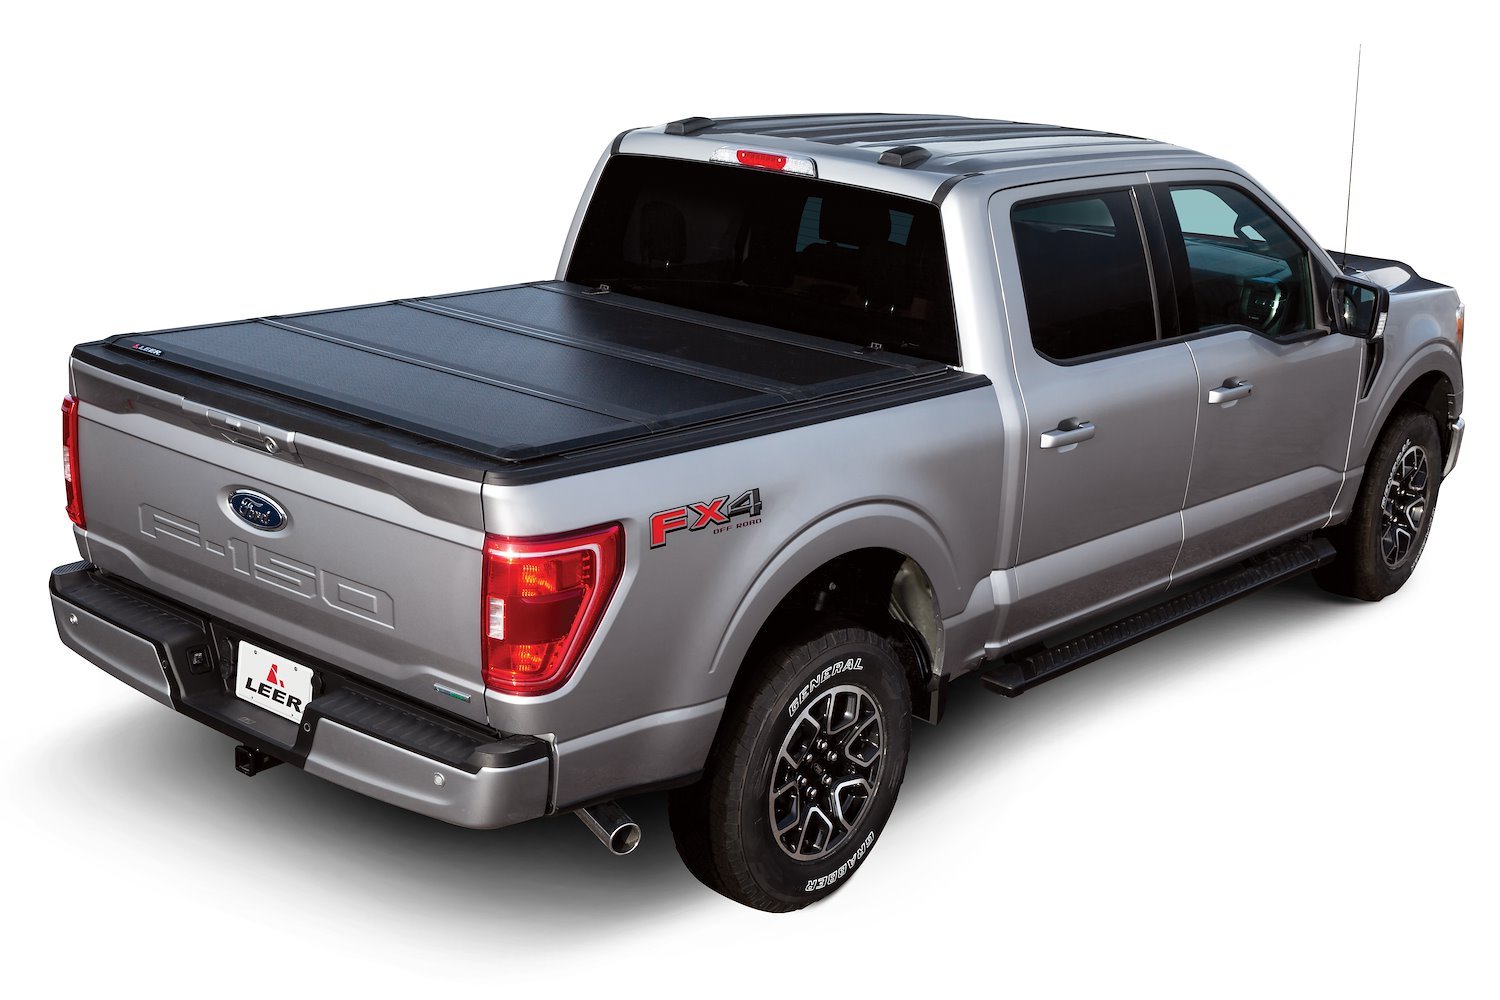 HF350M Hard Tri-Folding Tonneau Cover Fits Select Ford F-150 [Bed Length: 6 1/2 ft.]